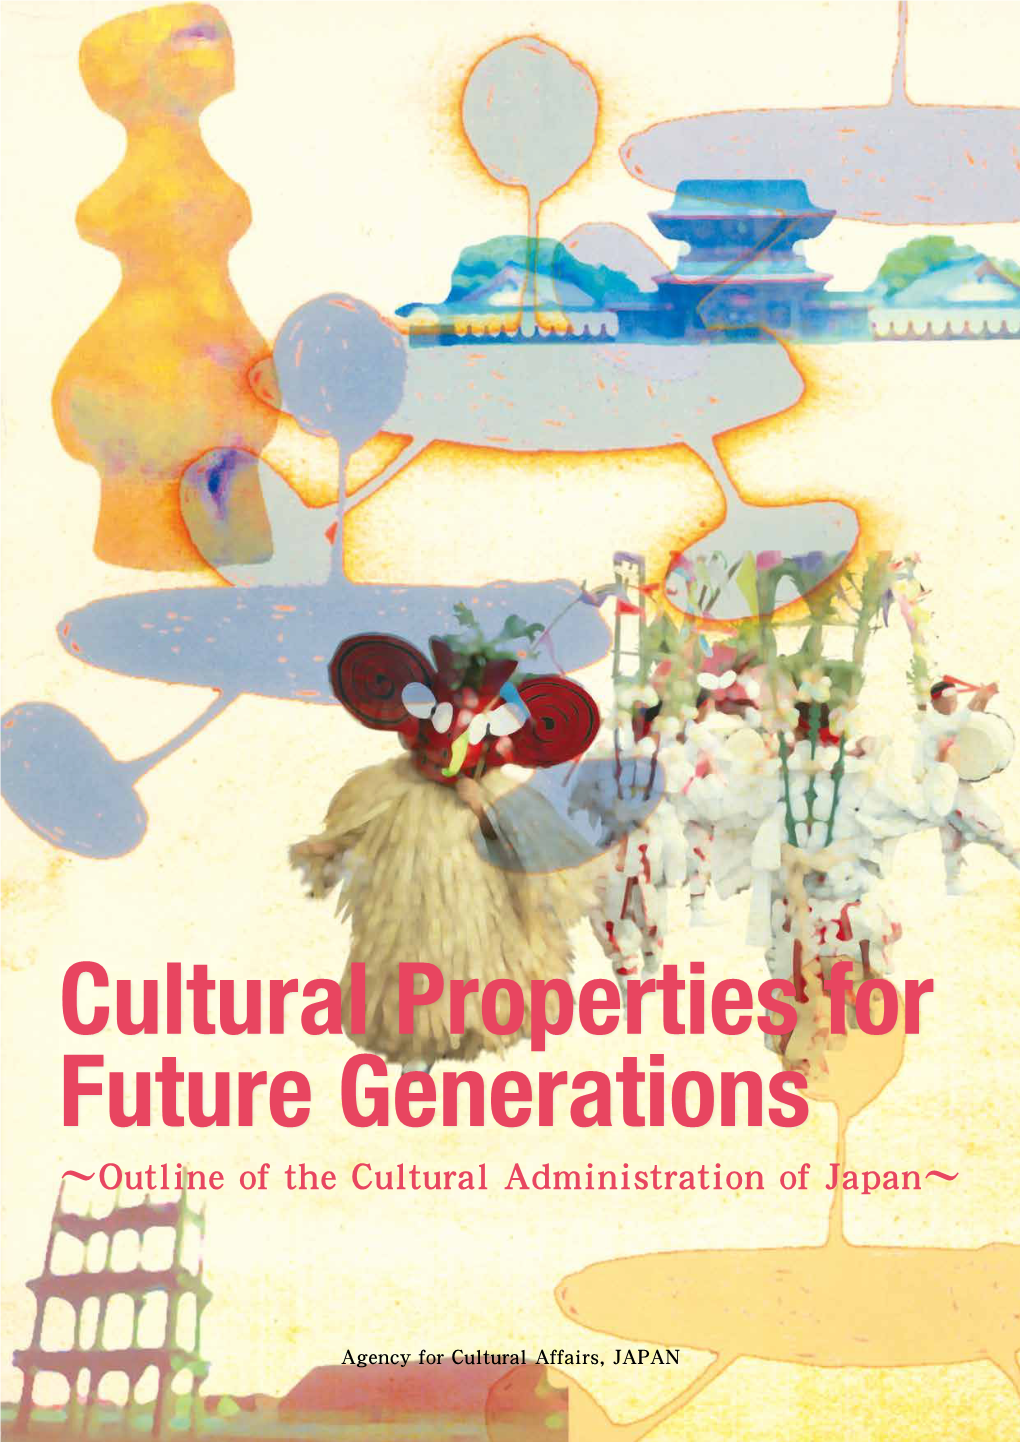 Cultural Properties for Future Generations 〜Outline of the Cultural Administration of Japan〜